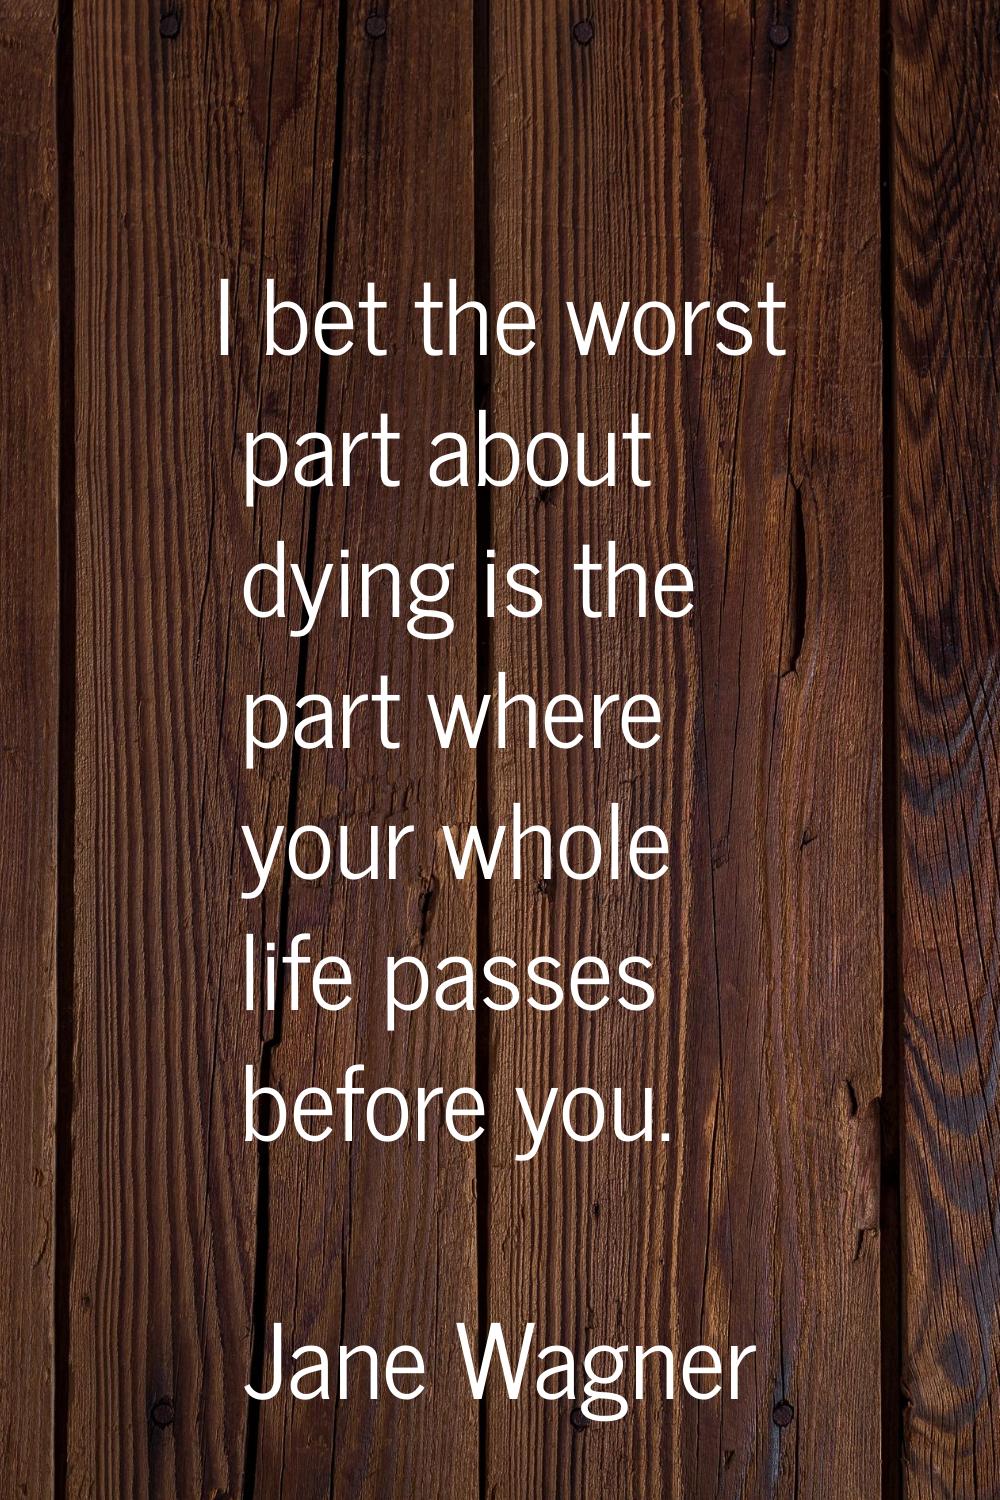 I bet the worst part about dying is the part where your whole life passes before you.